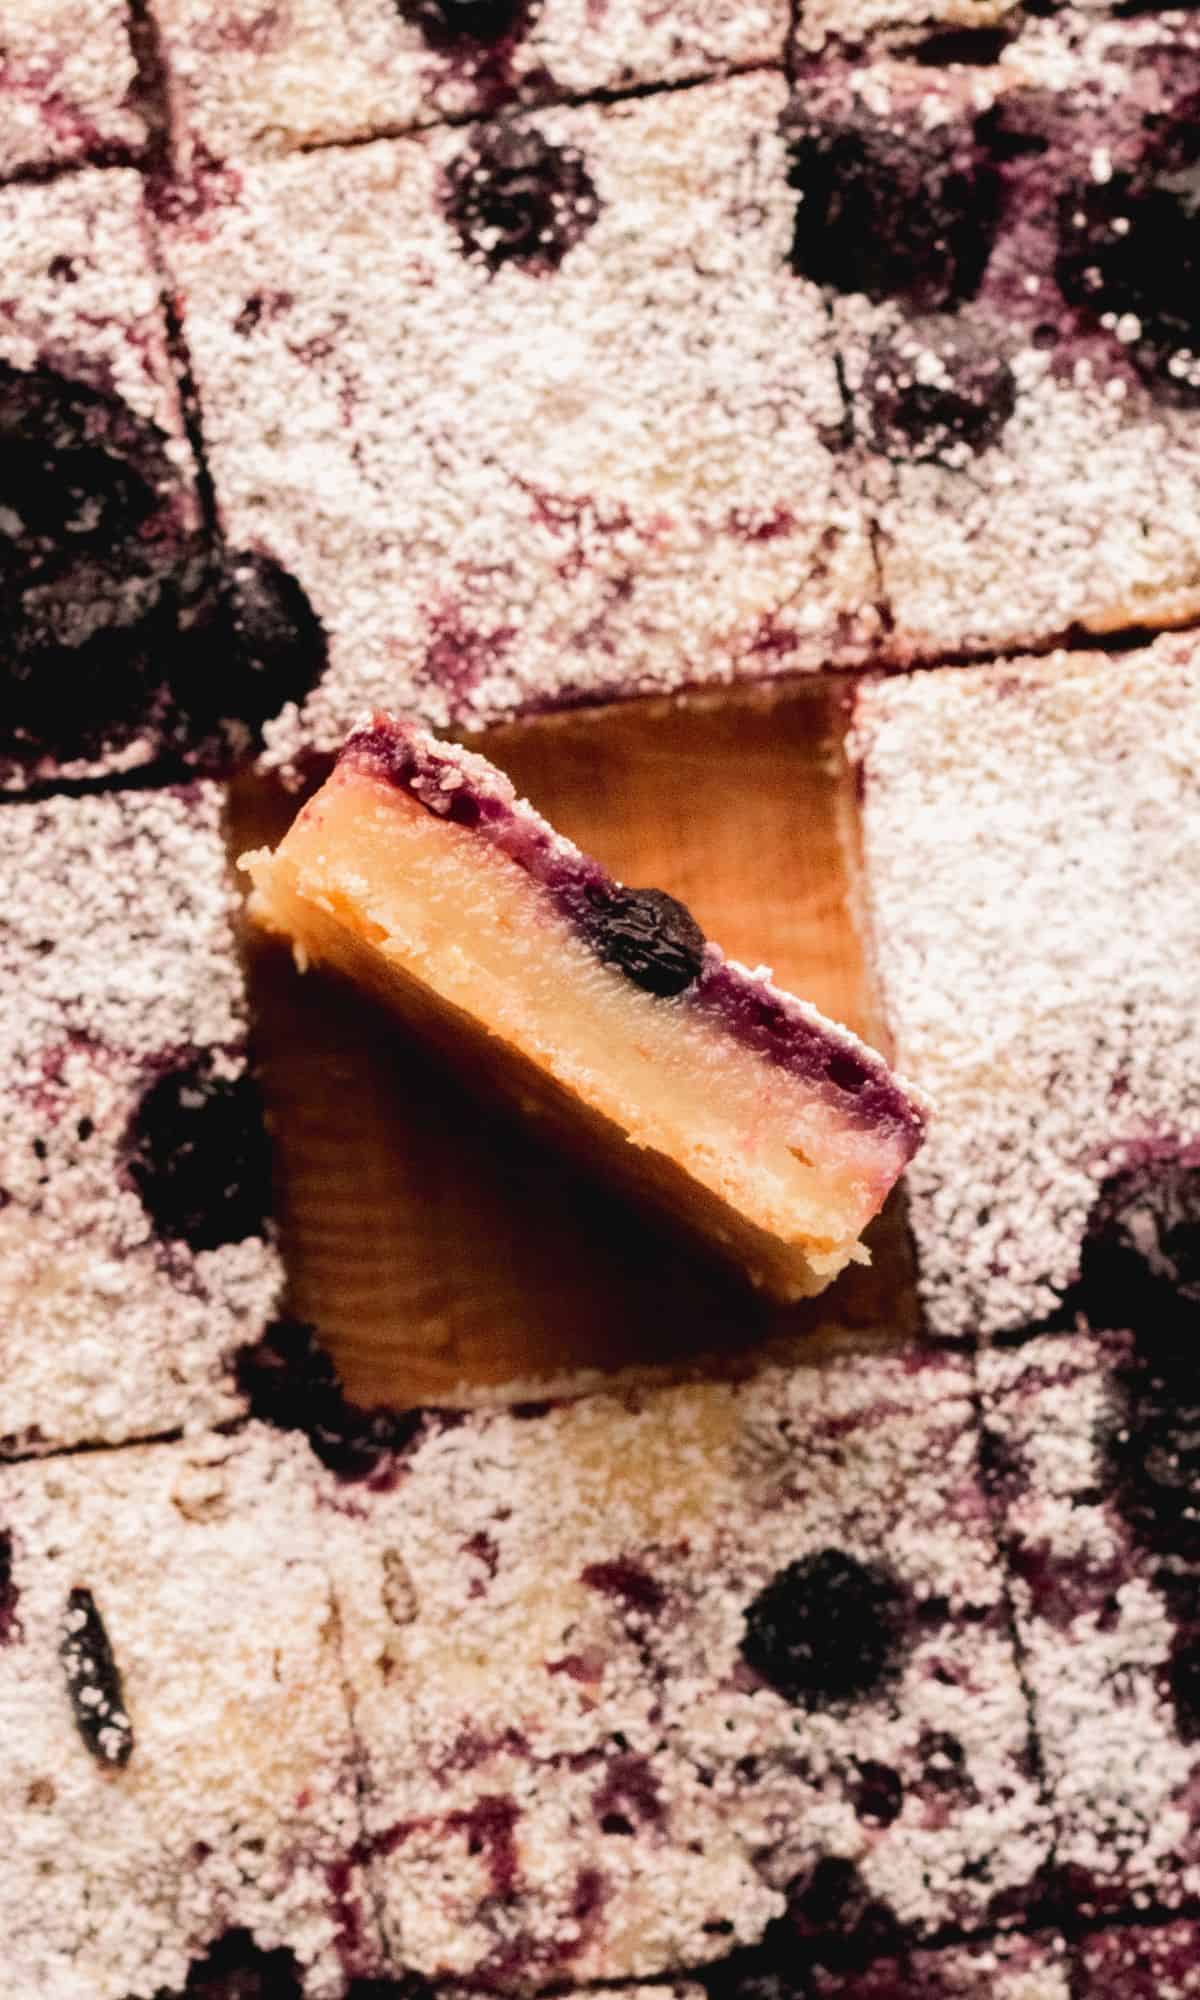 A side view of a blueberry lemon bar.